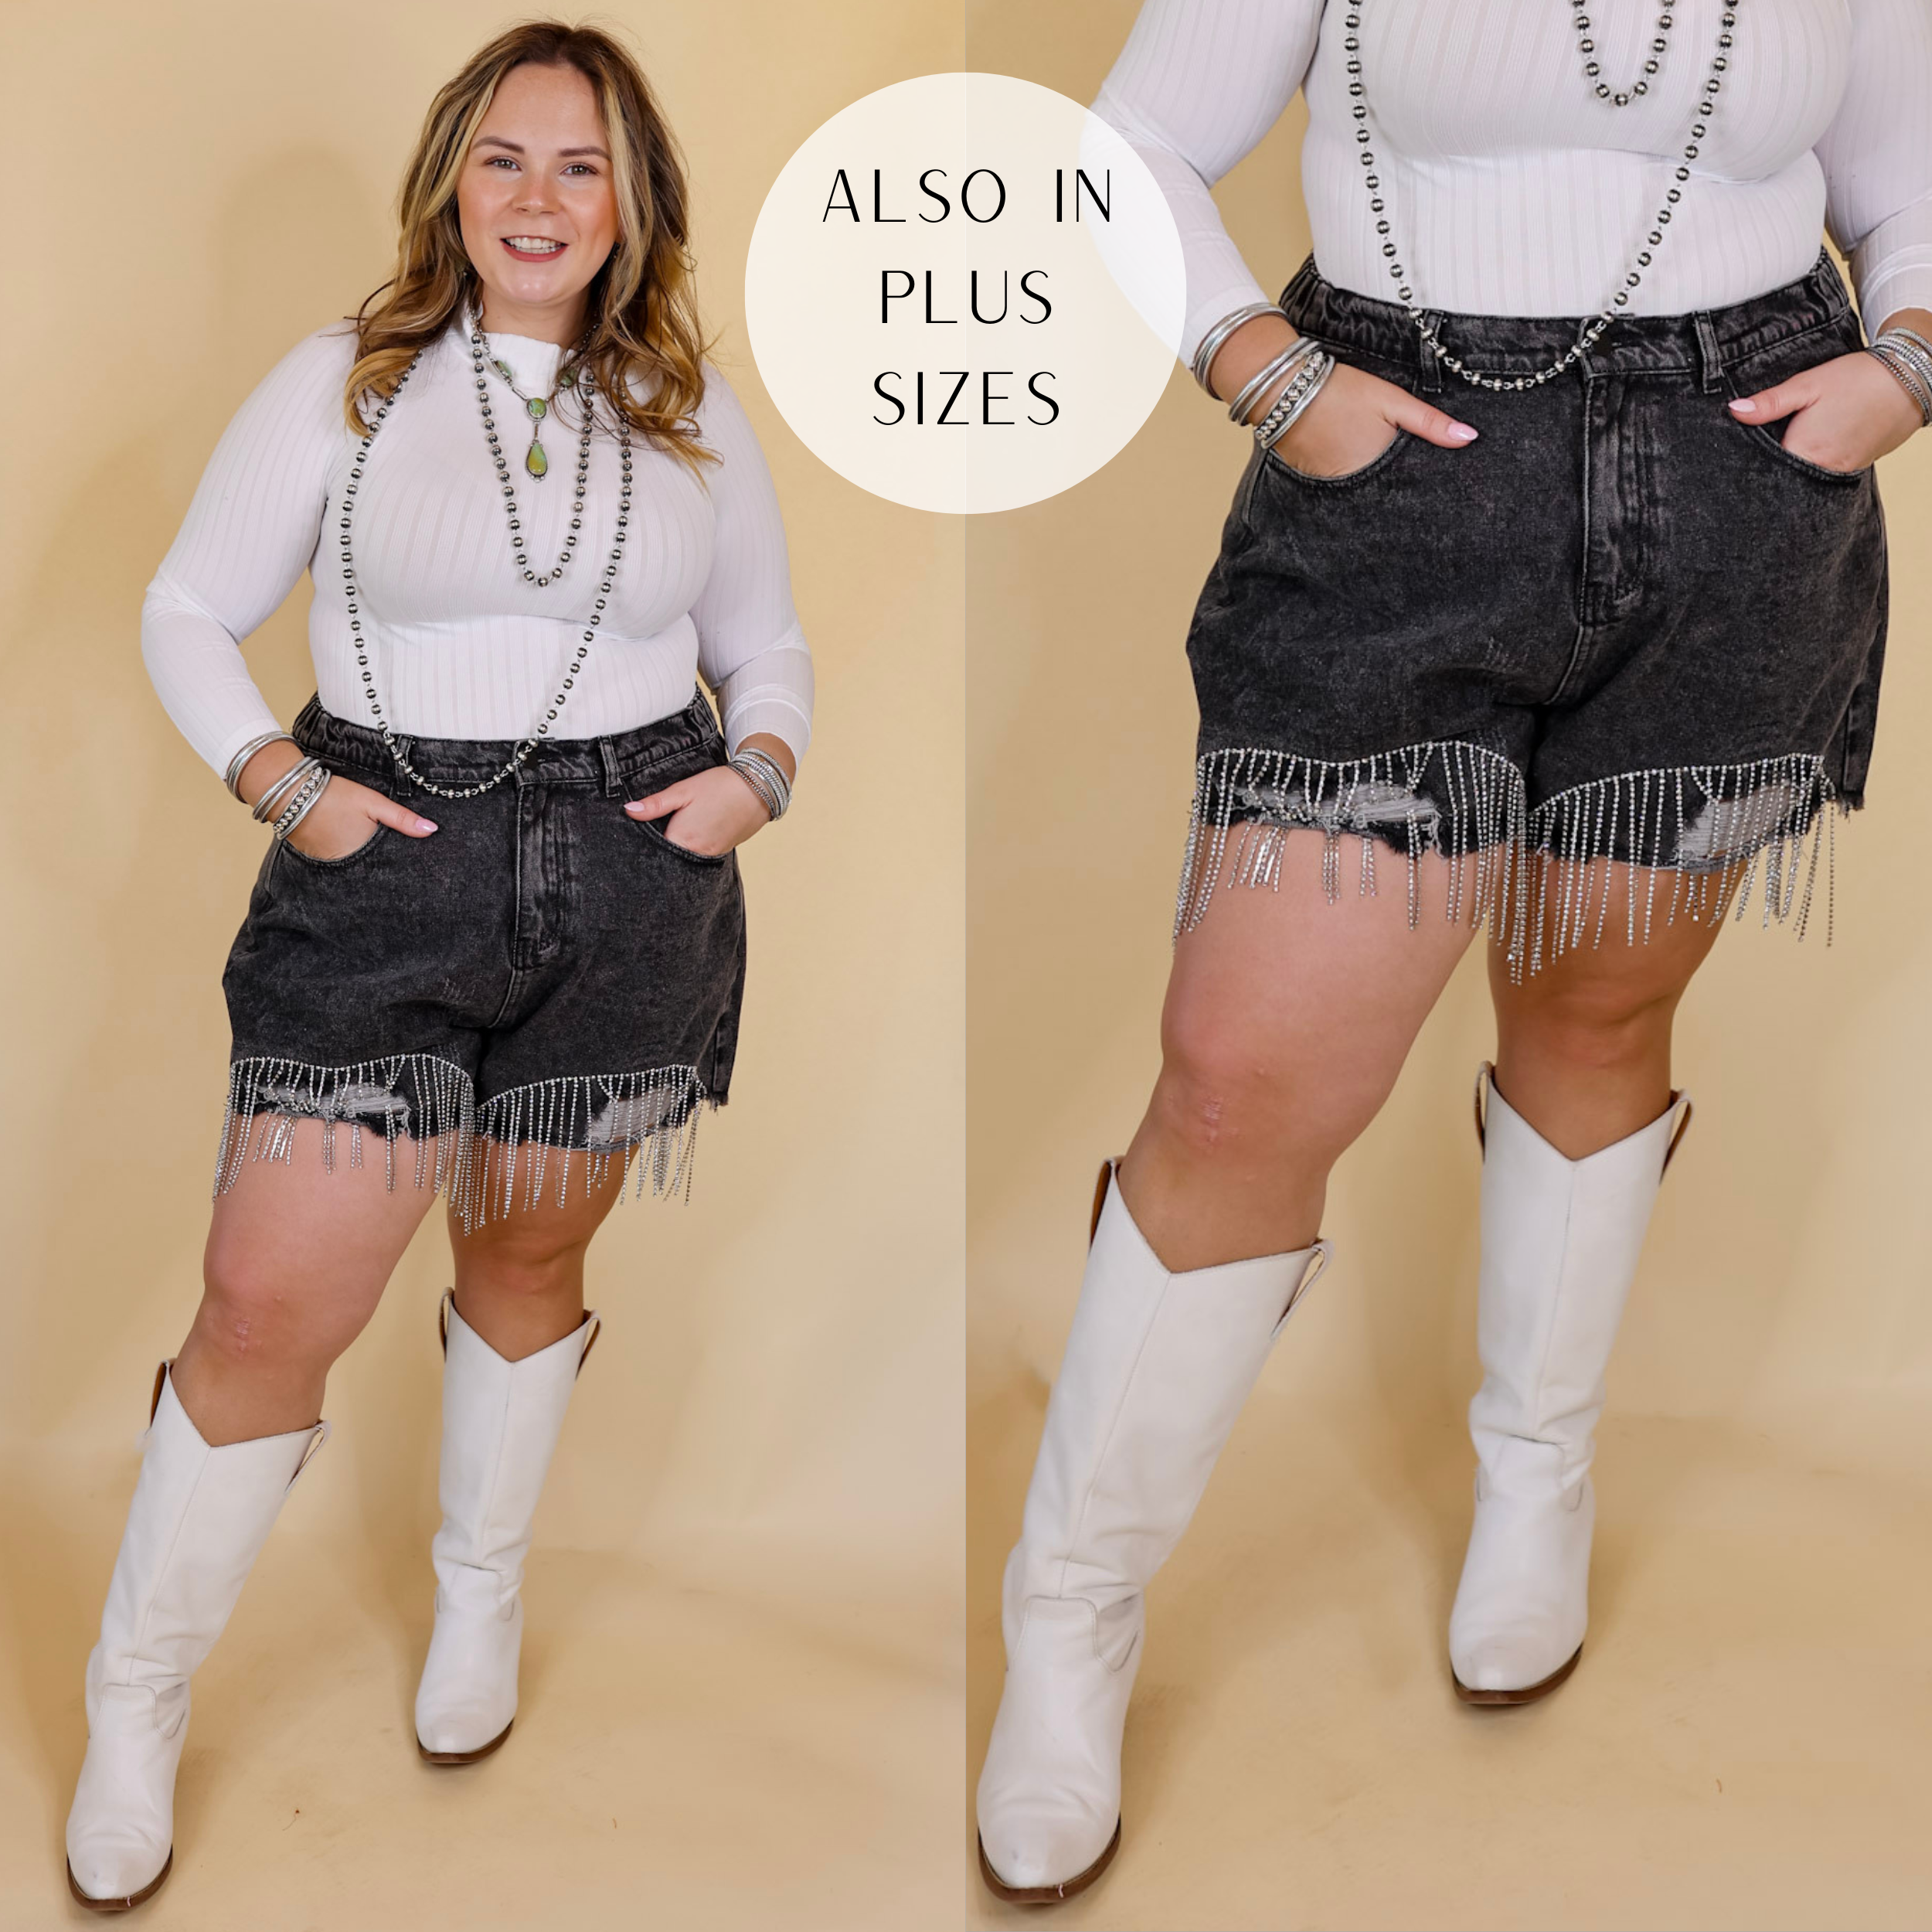 Model is wearing distressed denim shorts with crystal fringe along the bottom hem in black. Model has these shorts paired with a white, long sleeve top, white boots, and silver Navajo jewelry. Background is a solid tan.